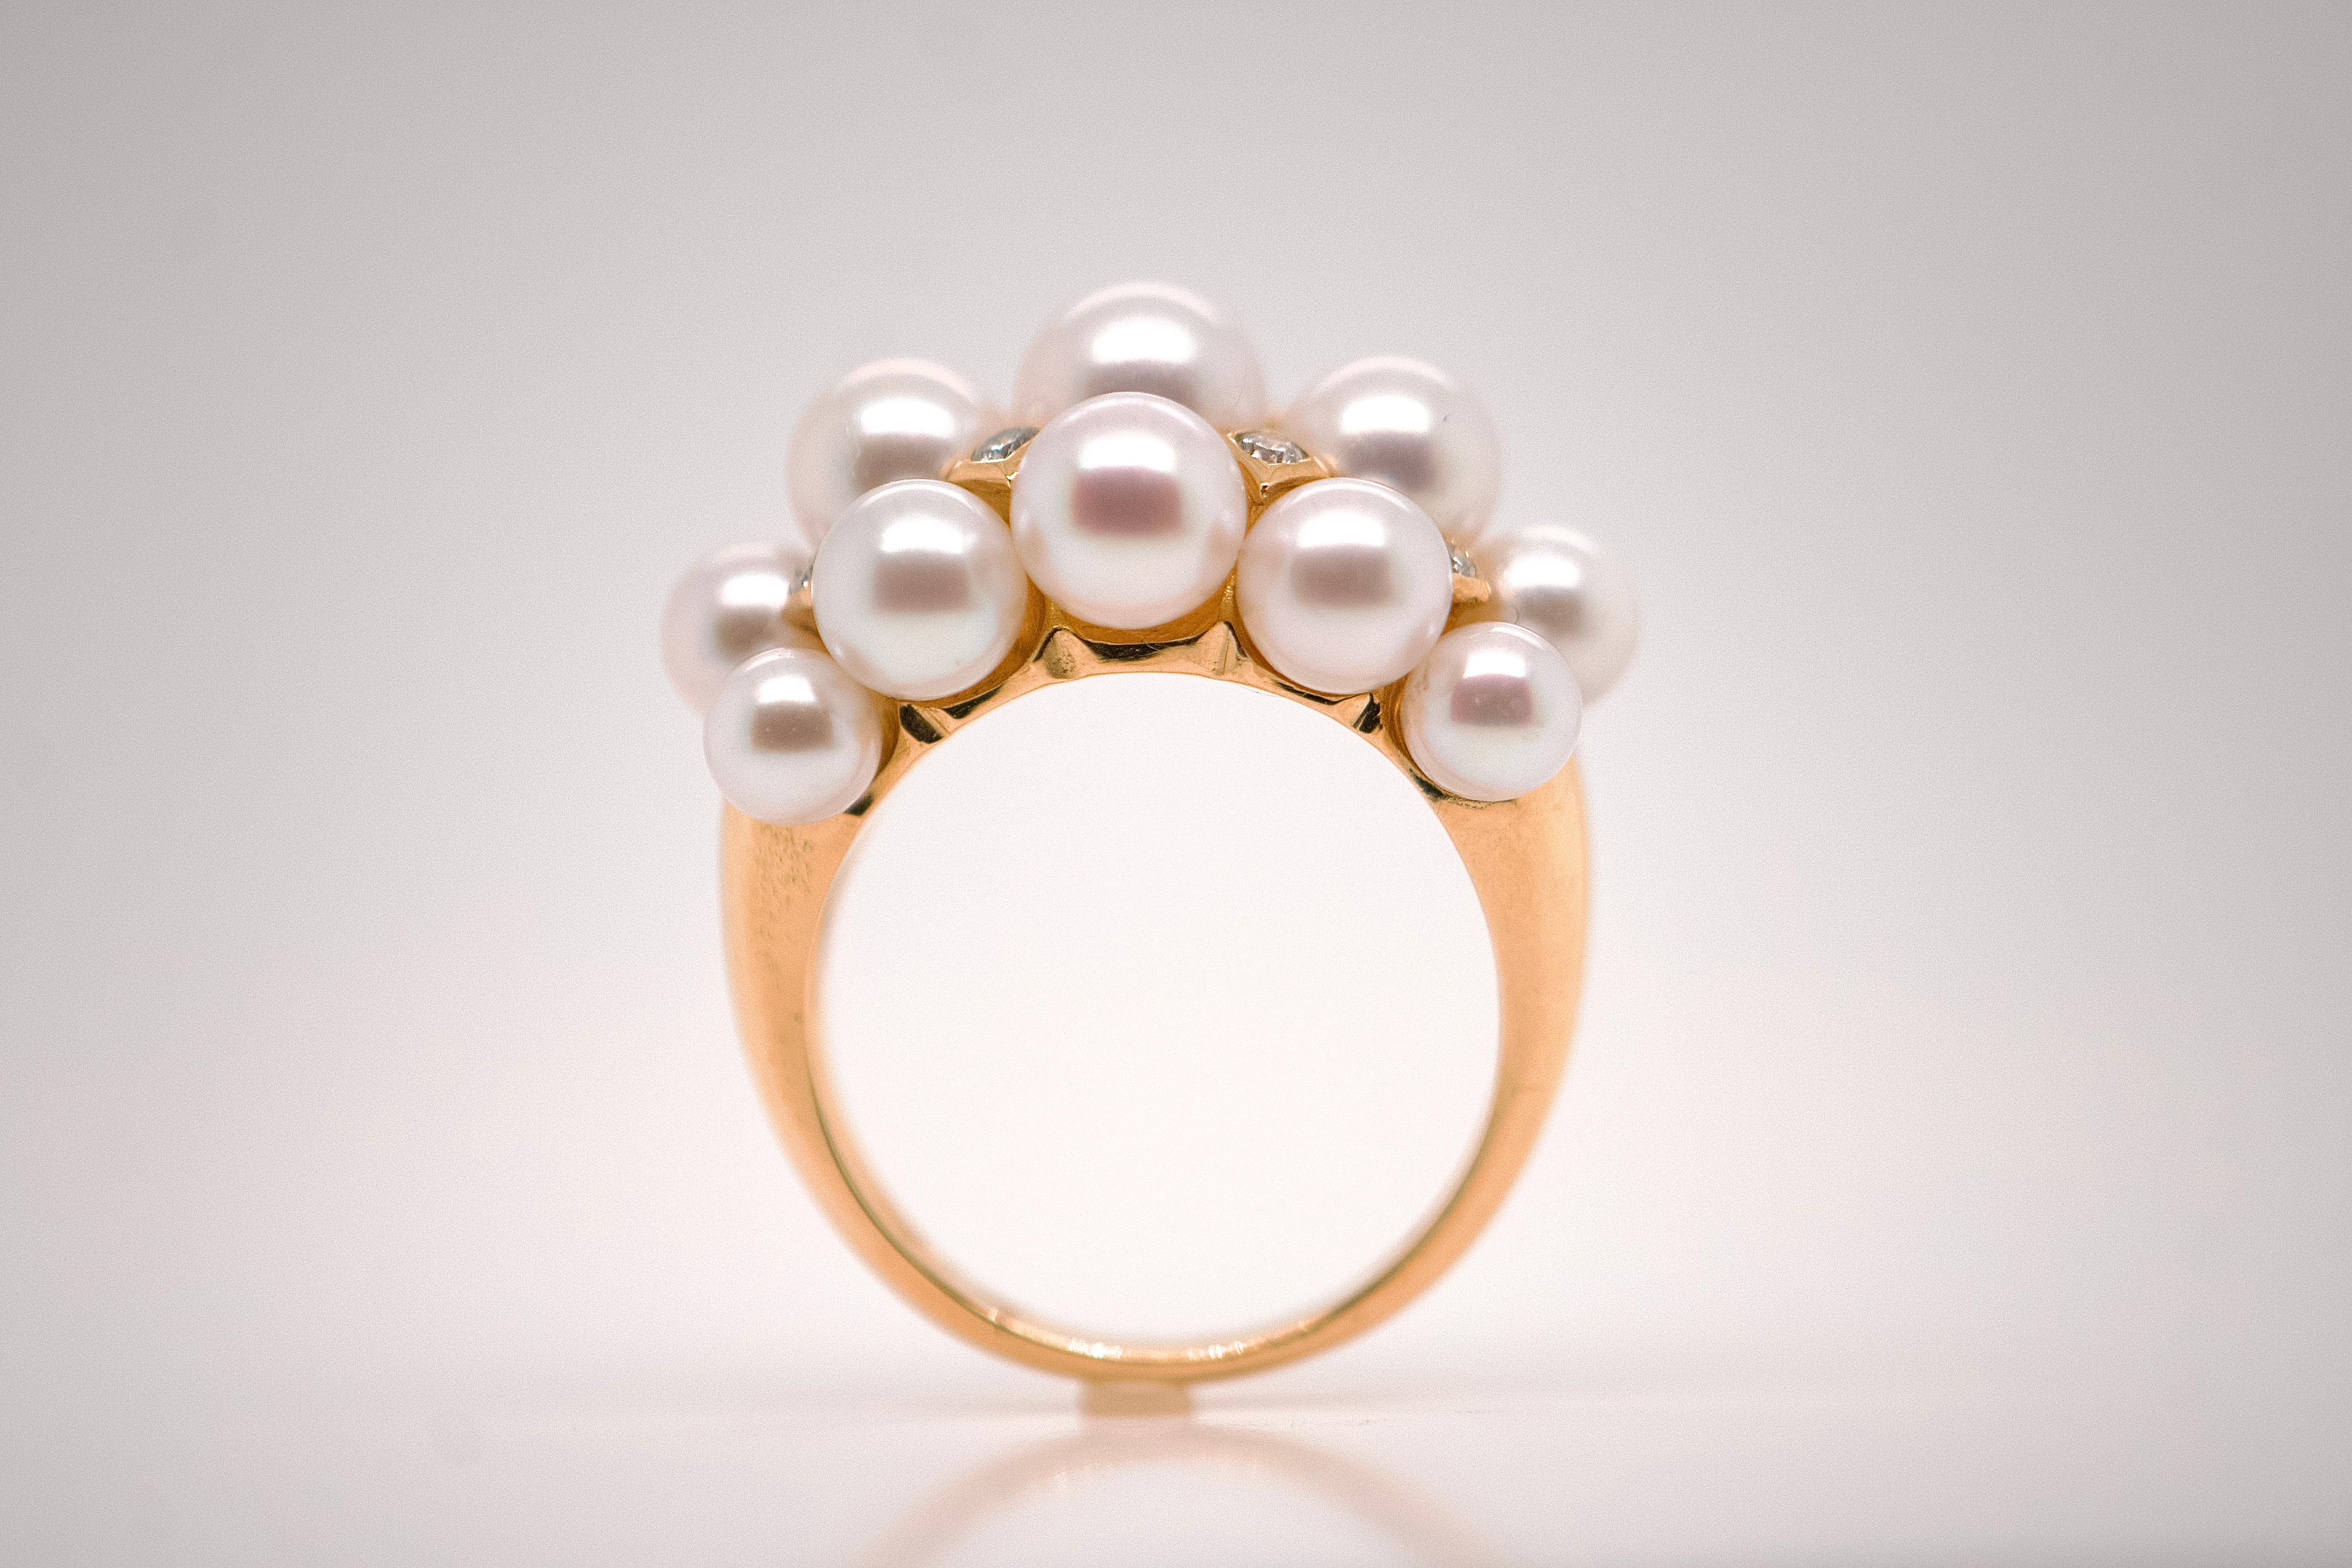 This 18-carat gold cocktail ring is a true masterpiece, adorned with 8 diamonds totaling 0.180 carats and 15 exquisite pearls that emit a radiant, iridescent glow. Its baroque style imparts a unique and sophisticated allure, making this piece a